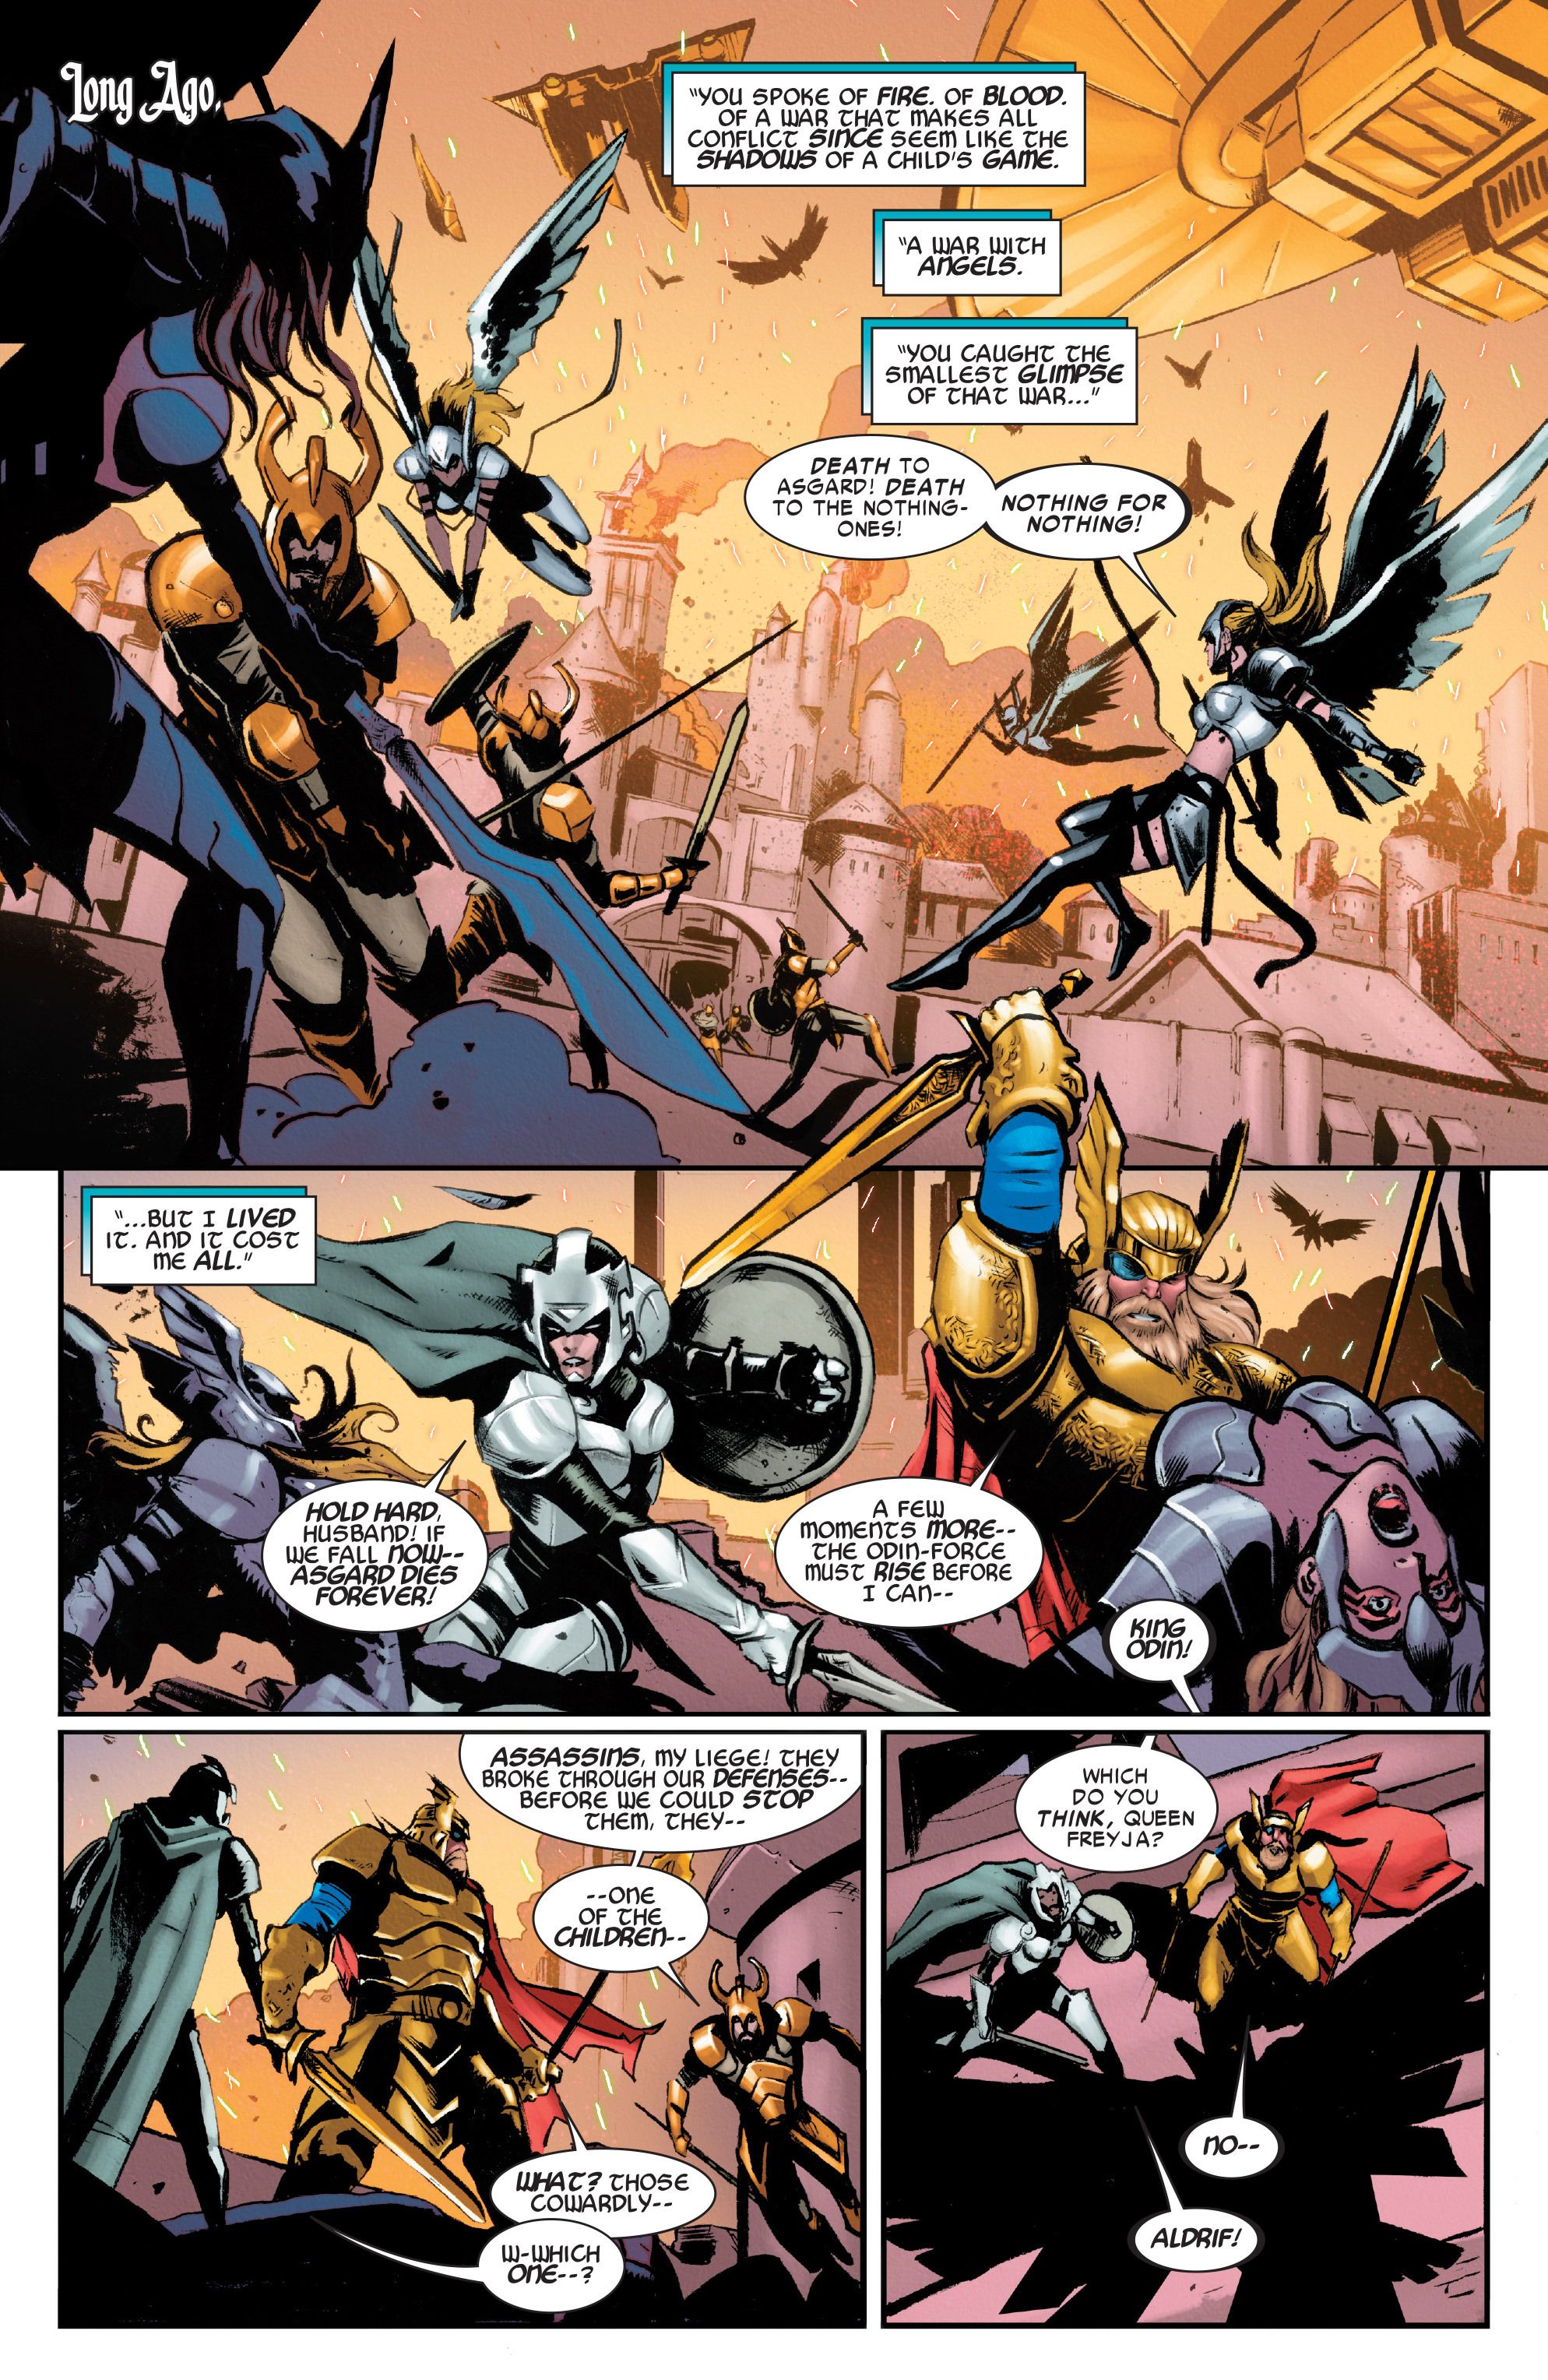 Asgard fights the Tenth World